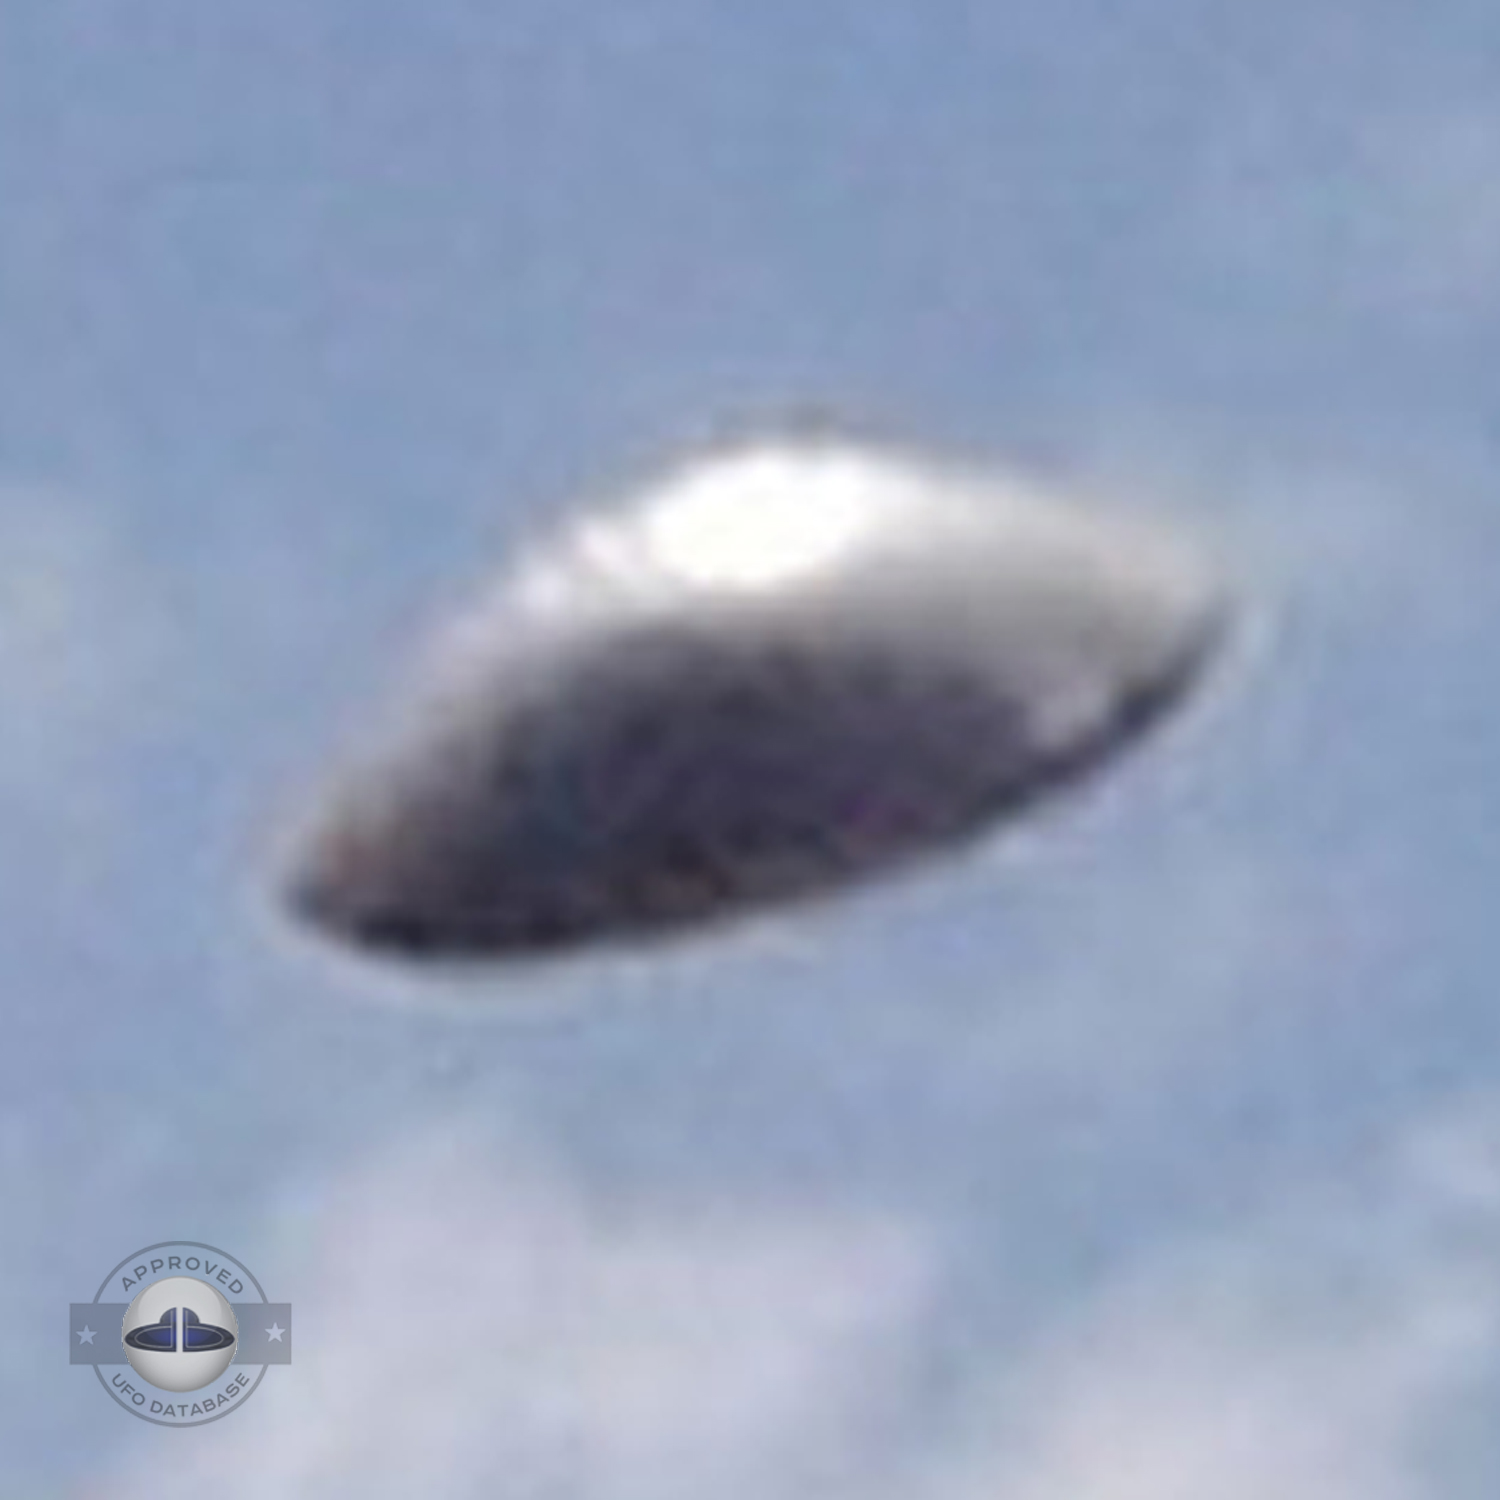 UFO with silver dome shape in clear blue sky. UFO picture Alagamar UFO Picture #86-4